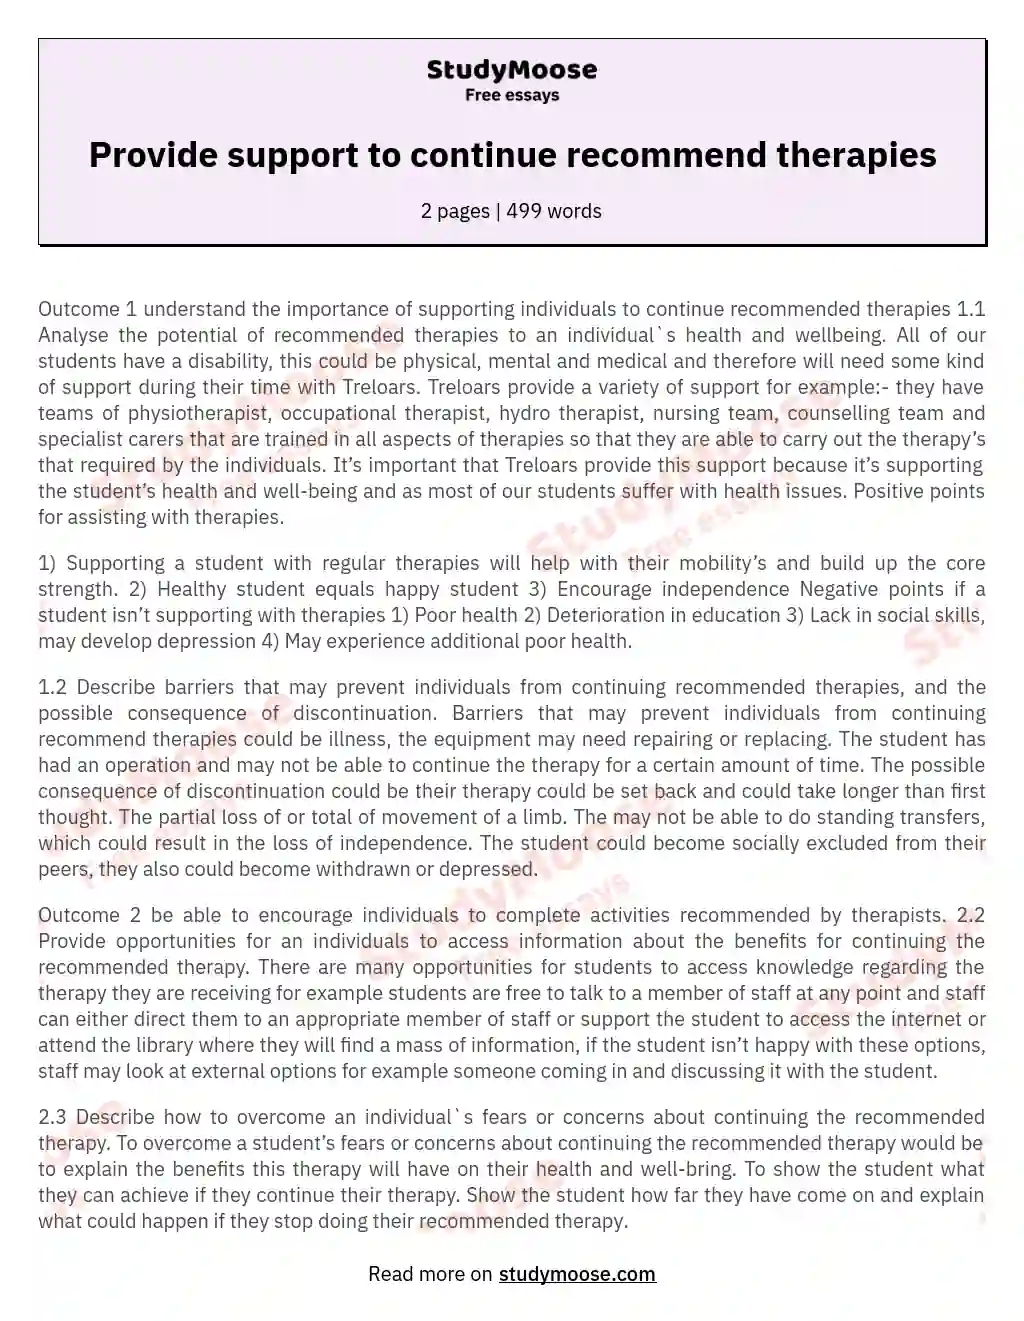 Provide support to continue recommend therapies